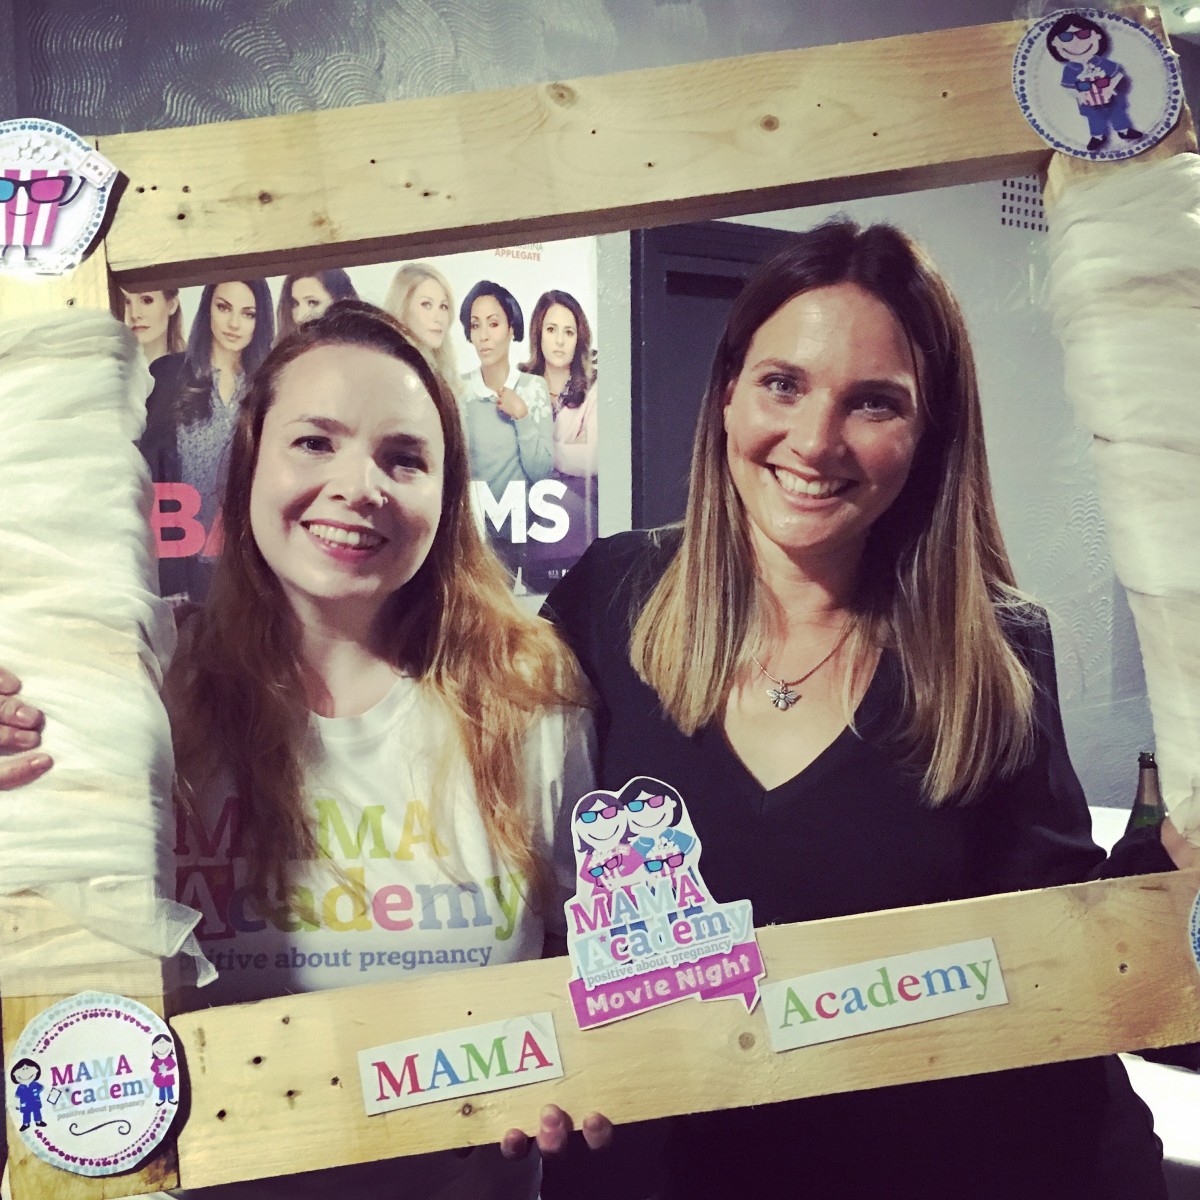 Harrogate Mama Blogger Lucy Playford (R) with Kate Mortimer from MAMA Academy charity raising money through the Harrogate 